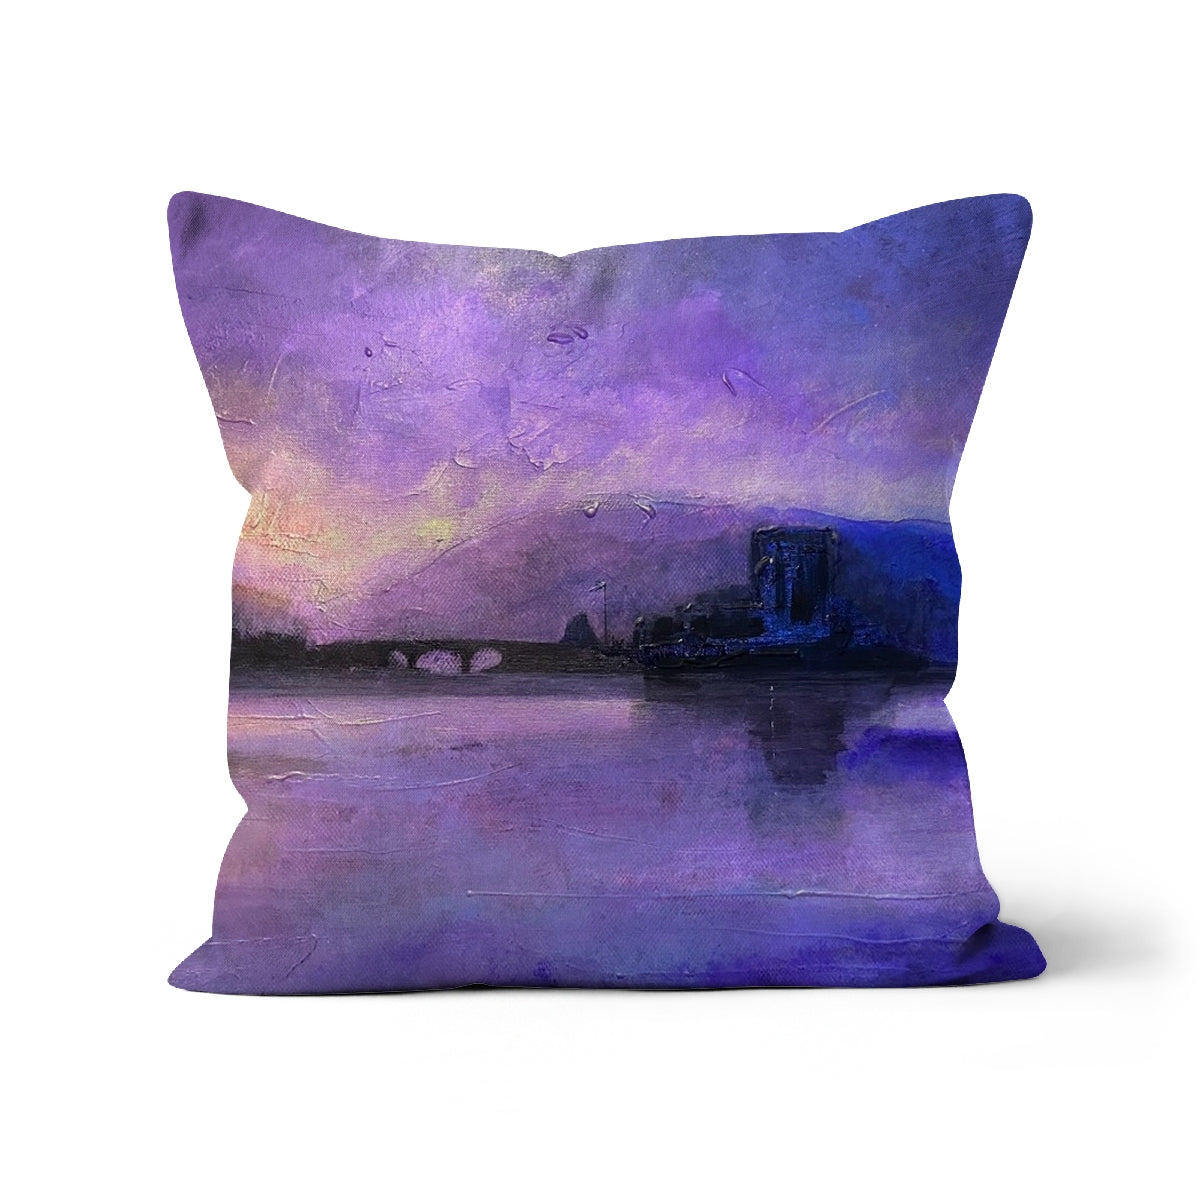 Eilean Donan Castle Moonset Art Gifts Cushion-Cushions-Historic & Iconic Scotland Art Gallery-Canvas-16"x16"-Paintings, Prints, Homeware, Art Gifts From Scotland By Scottish Artist Kevin Hunter